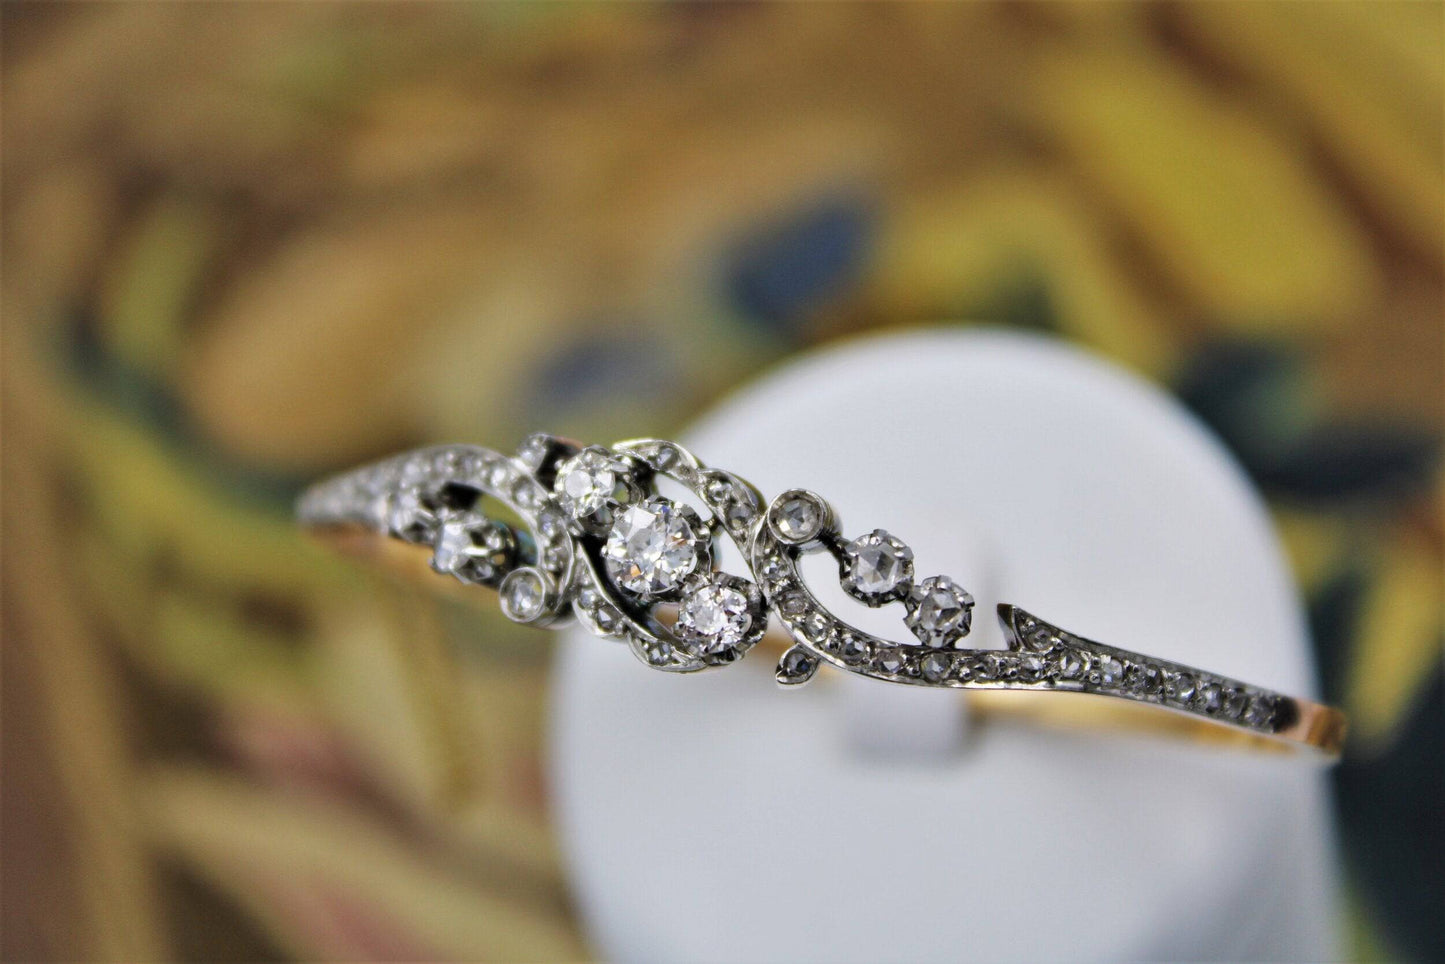 A very fine "Belle Epoque" Diamond Bangle in 18 ct. Yellow Gold & Platinum, French, Circa 1905. - Robin Haydock Antiques